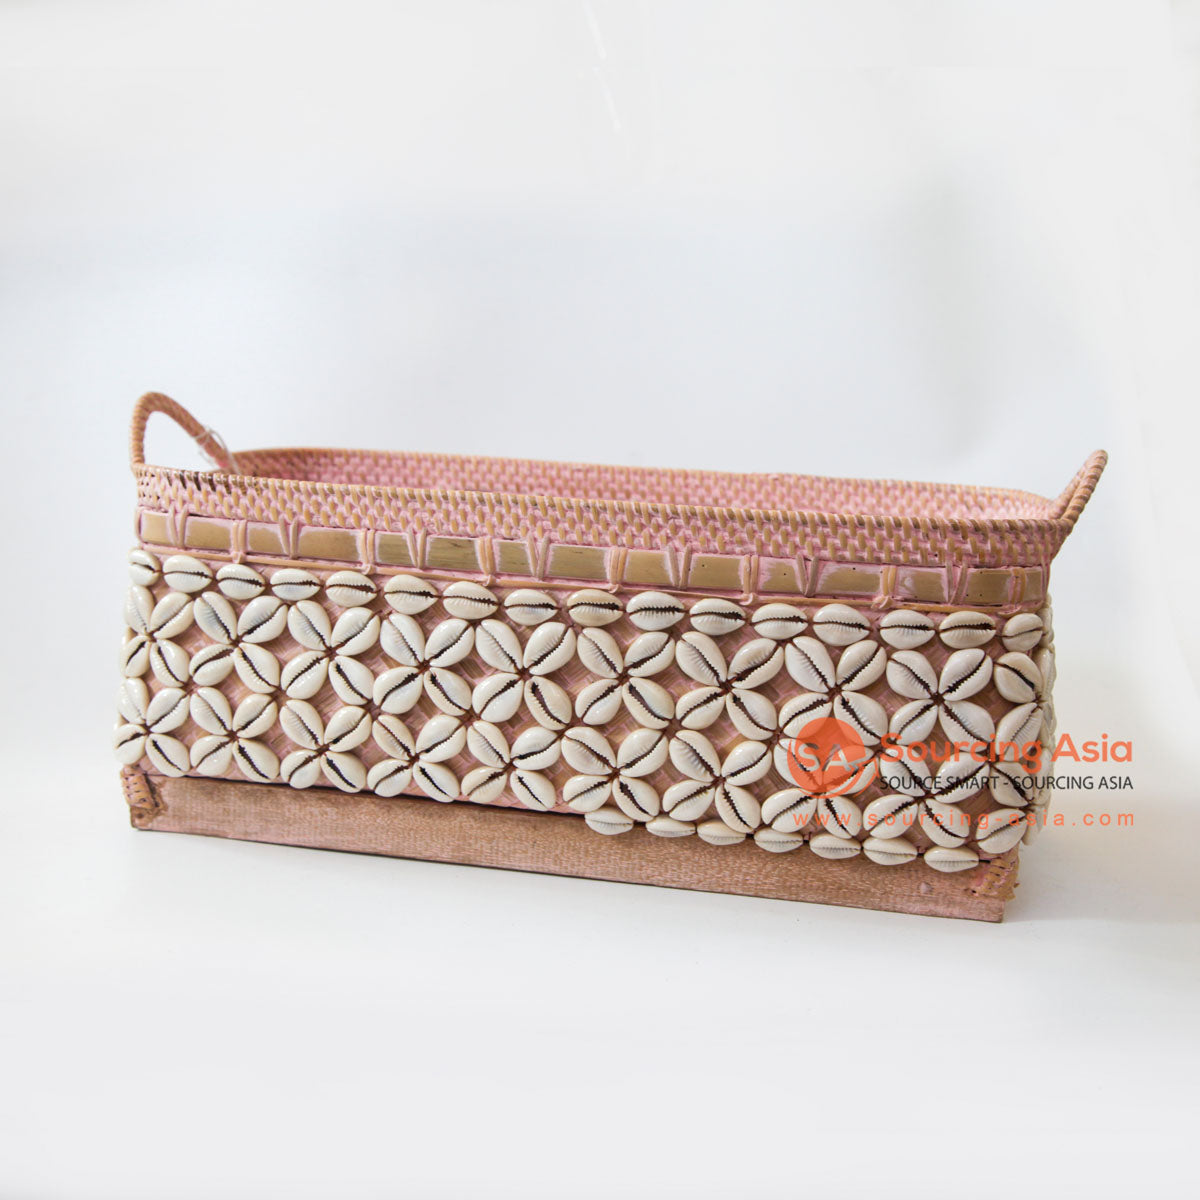 DHL146 PINK BAMBOO AND WHITE SHELL LONG BASKET WITH HANDLE